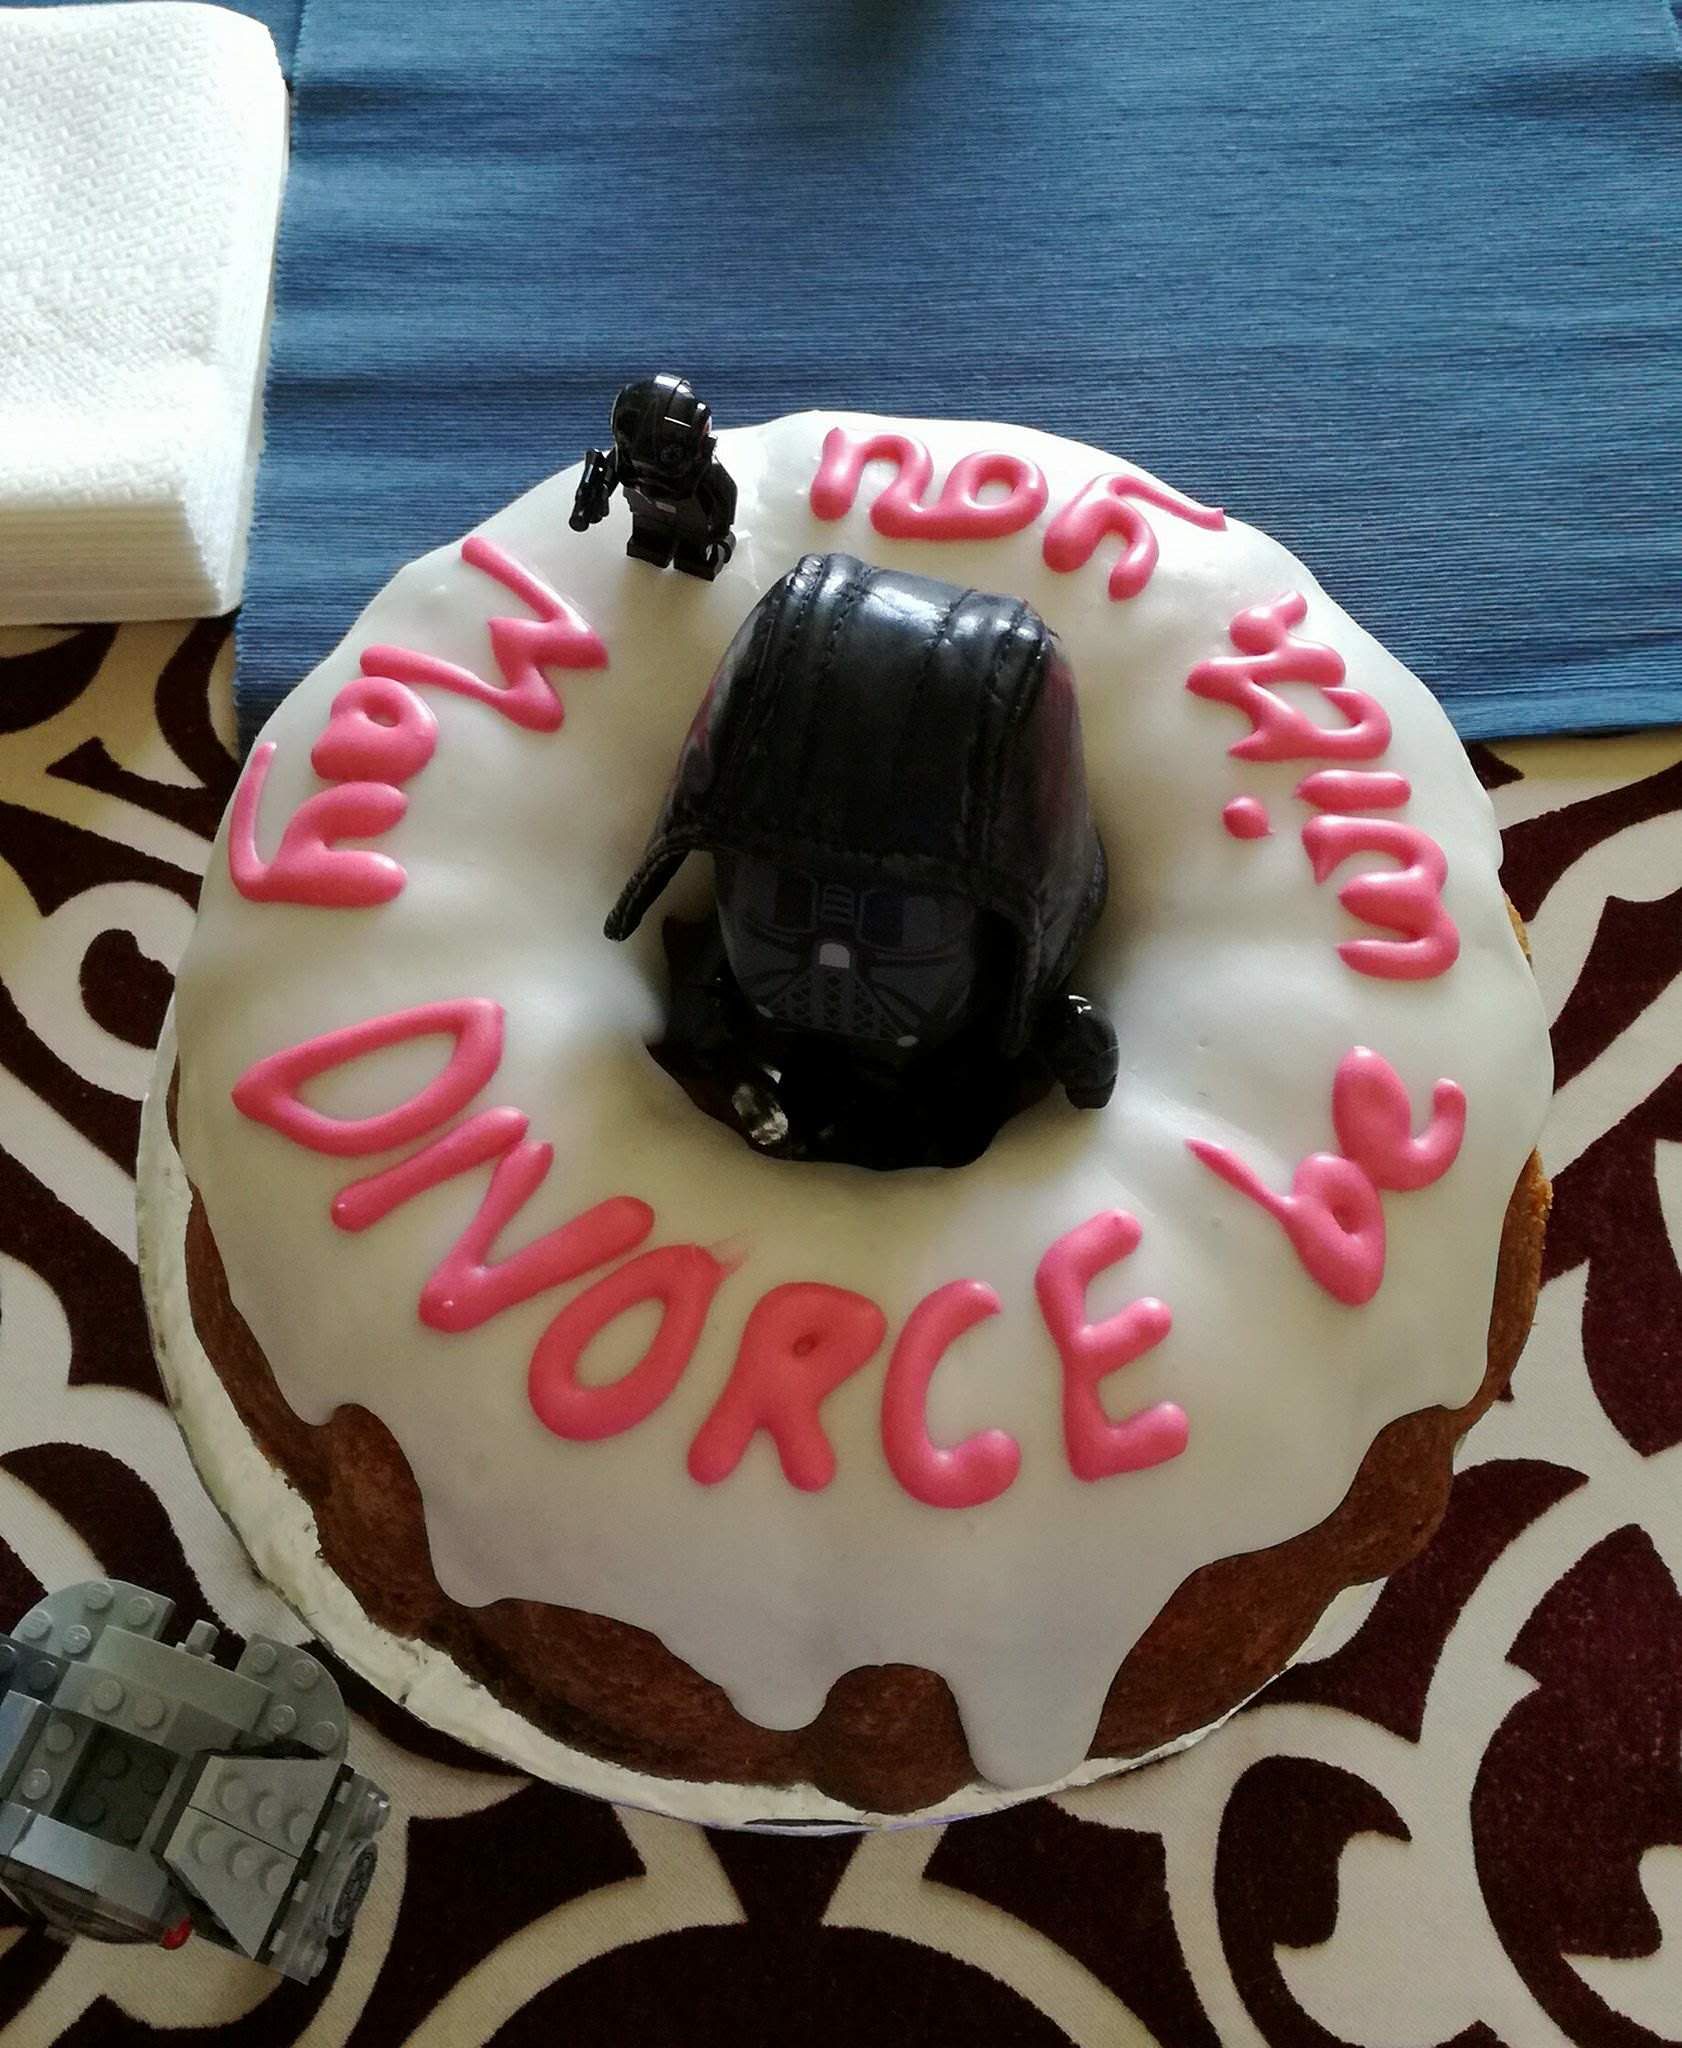 My mother is throwing a Star Wars themed divorce party